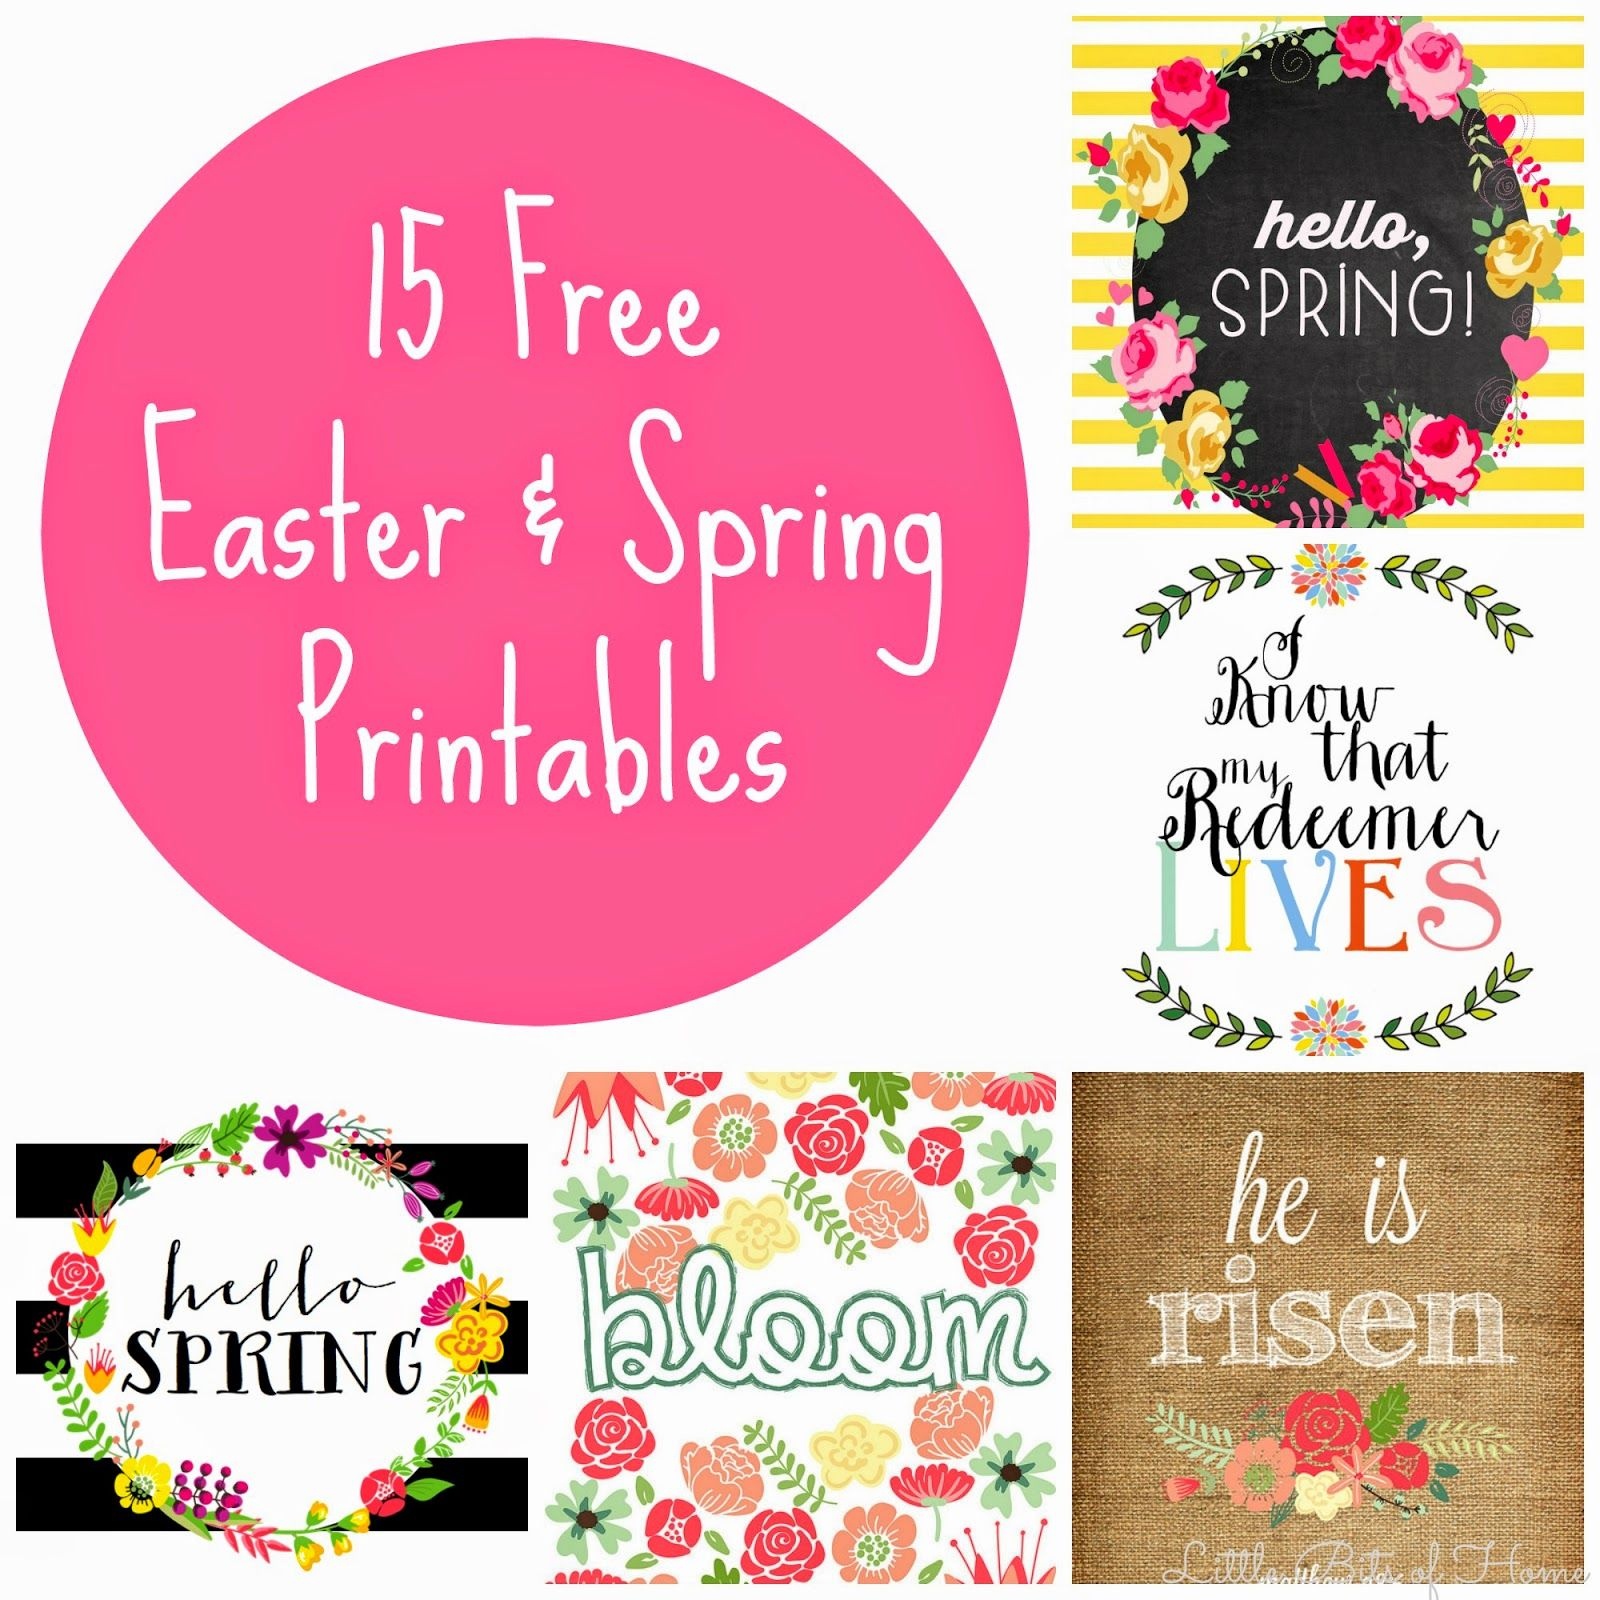 15 Free Spring And Easter Printables | Artsy Stuff | Easter - Free Printable Spring Decorations